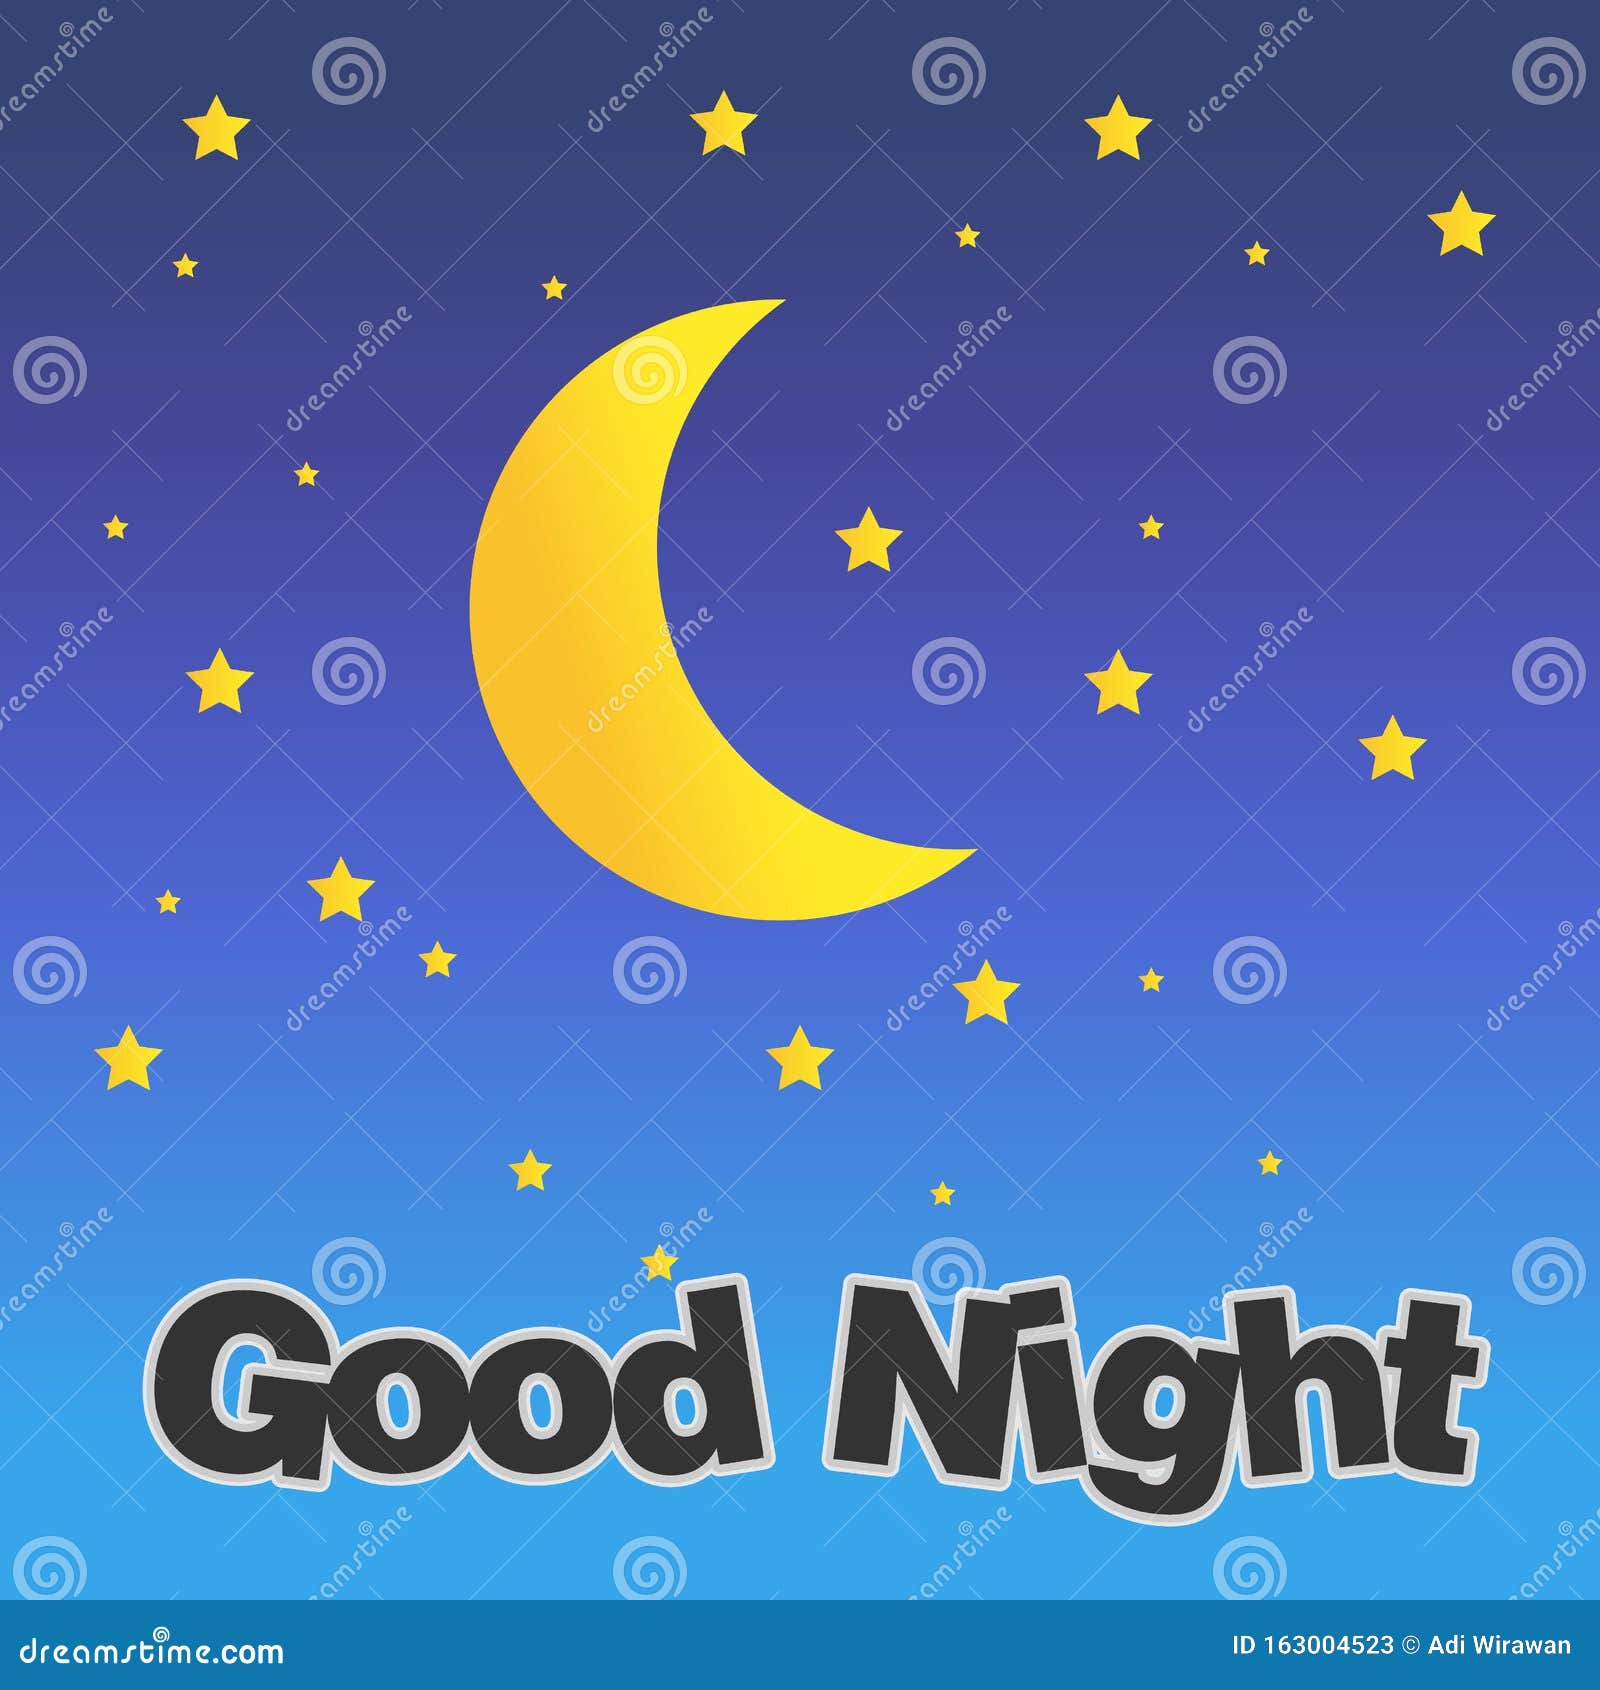 Good Night. Hand Drawn Typography Poster. Card Good Night Vector Image ...